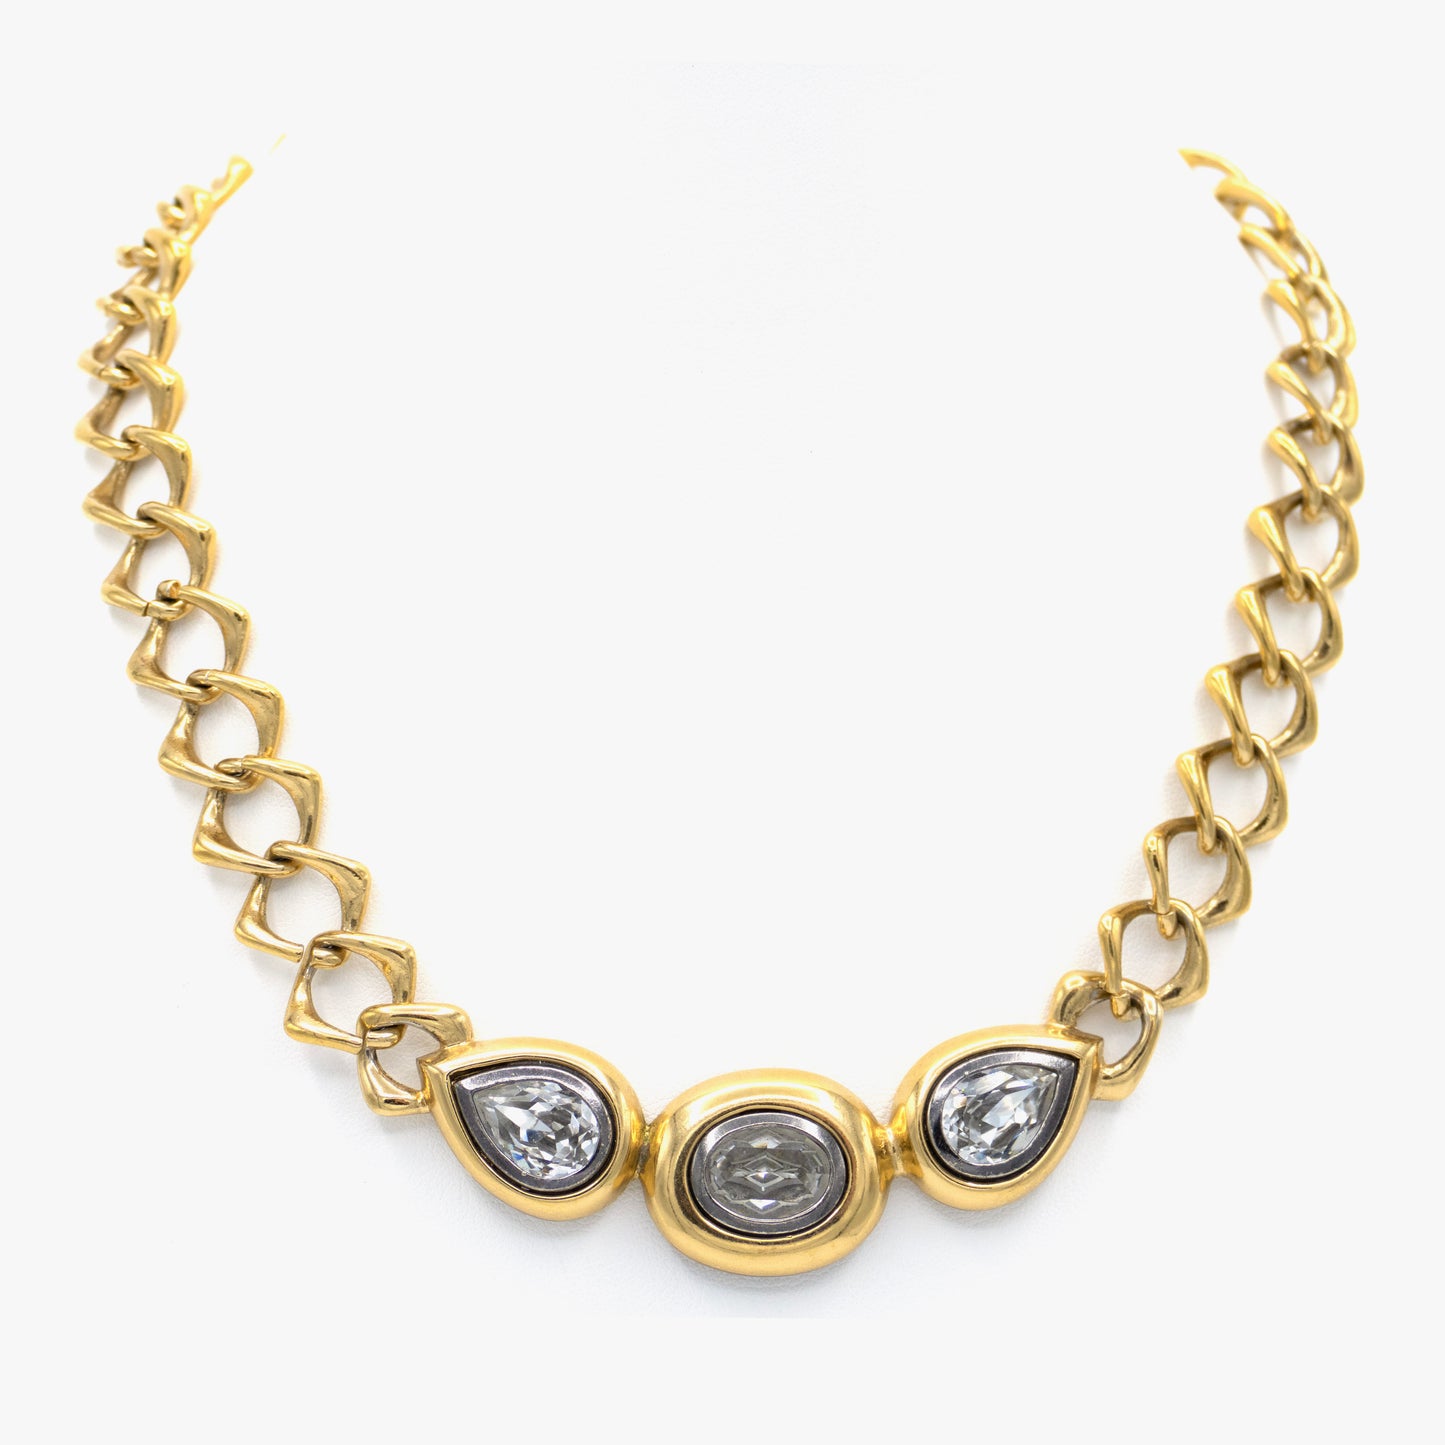 vintage ysl necklace from 1980's with gold tone chain and clear stones